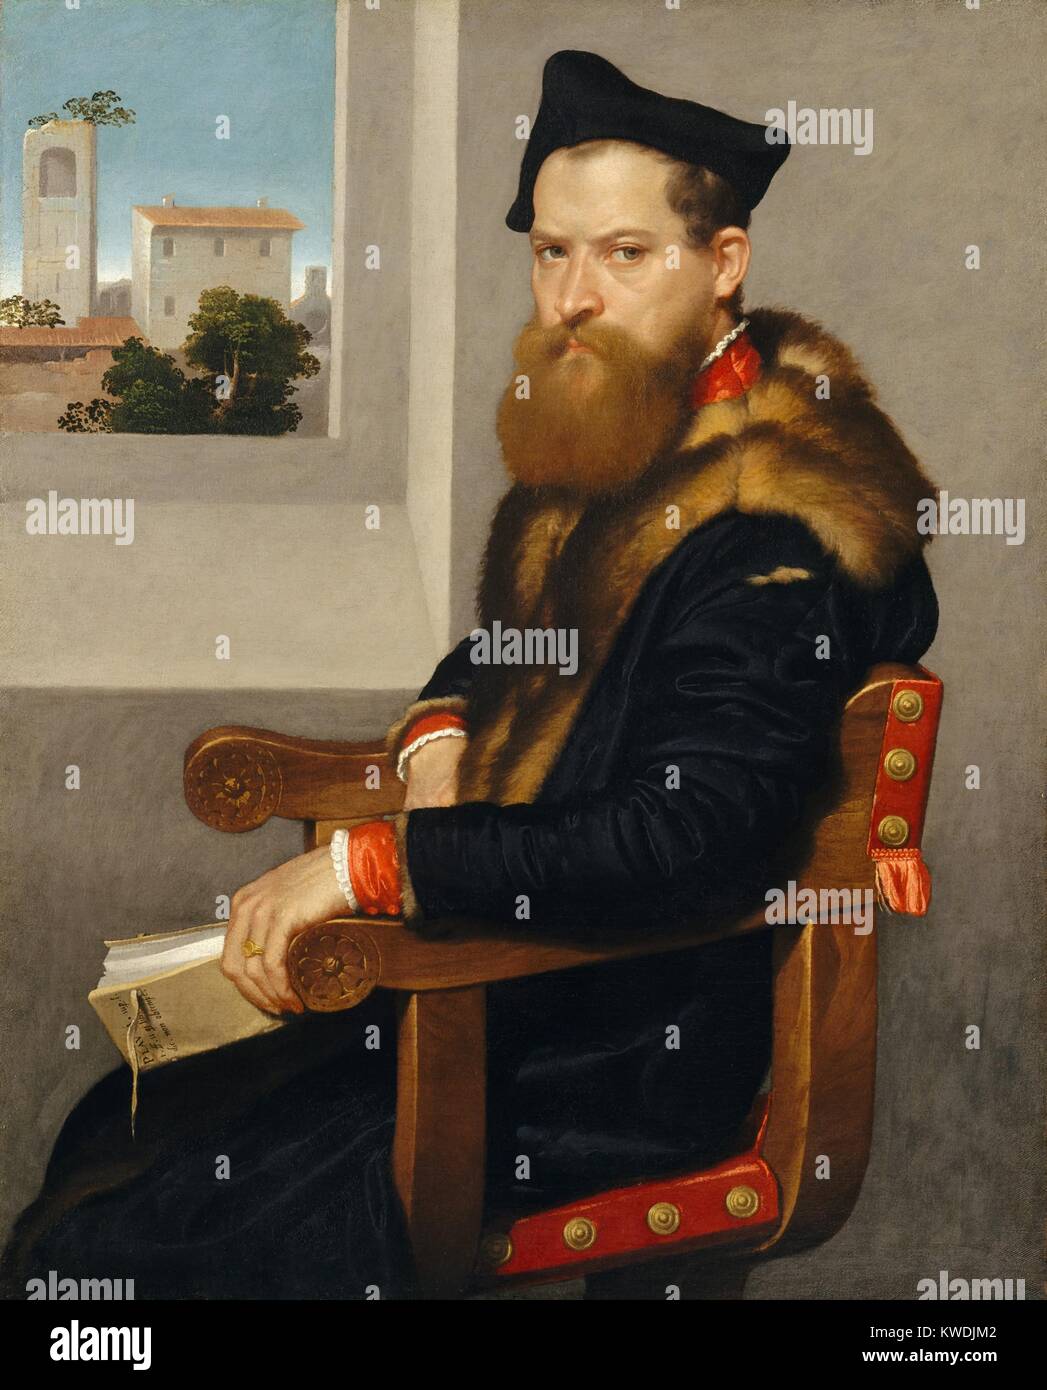 BARTOLOMMEO BONGHI, by Giovanni Battista Moroni, 1553, Italian Renaissance oil painting. Bonghi was a legal scholar and is holding a book on Roman civil law. Through the window is a recognizable tower of the city of Bergamo (BSLOC 2017 16 80) Stock Photo